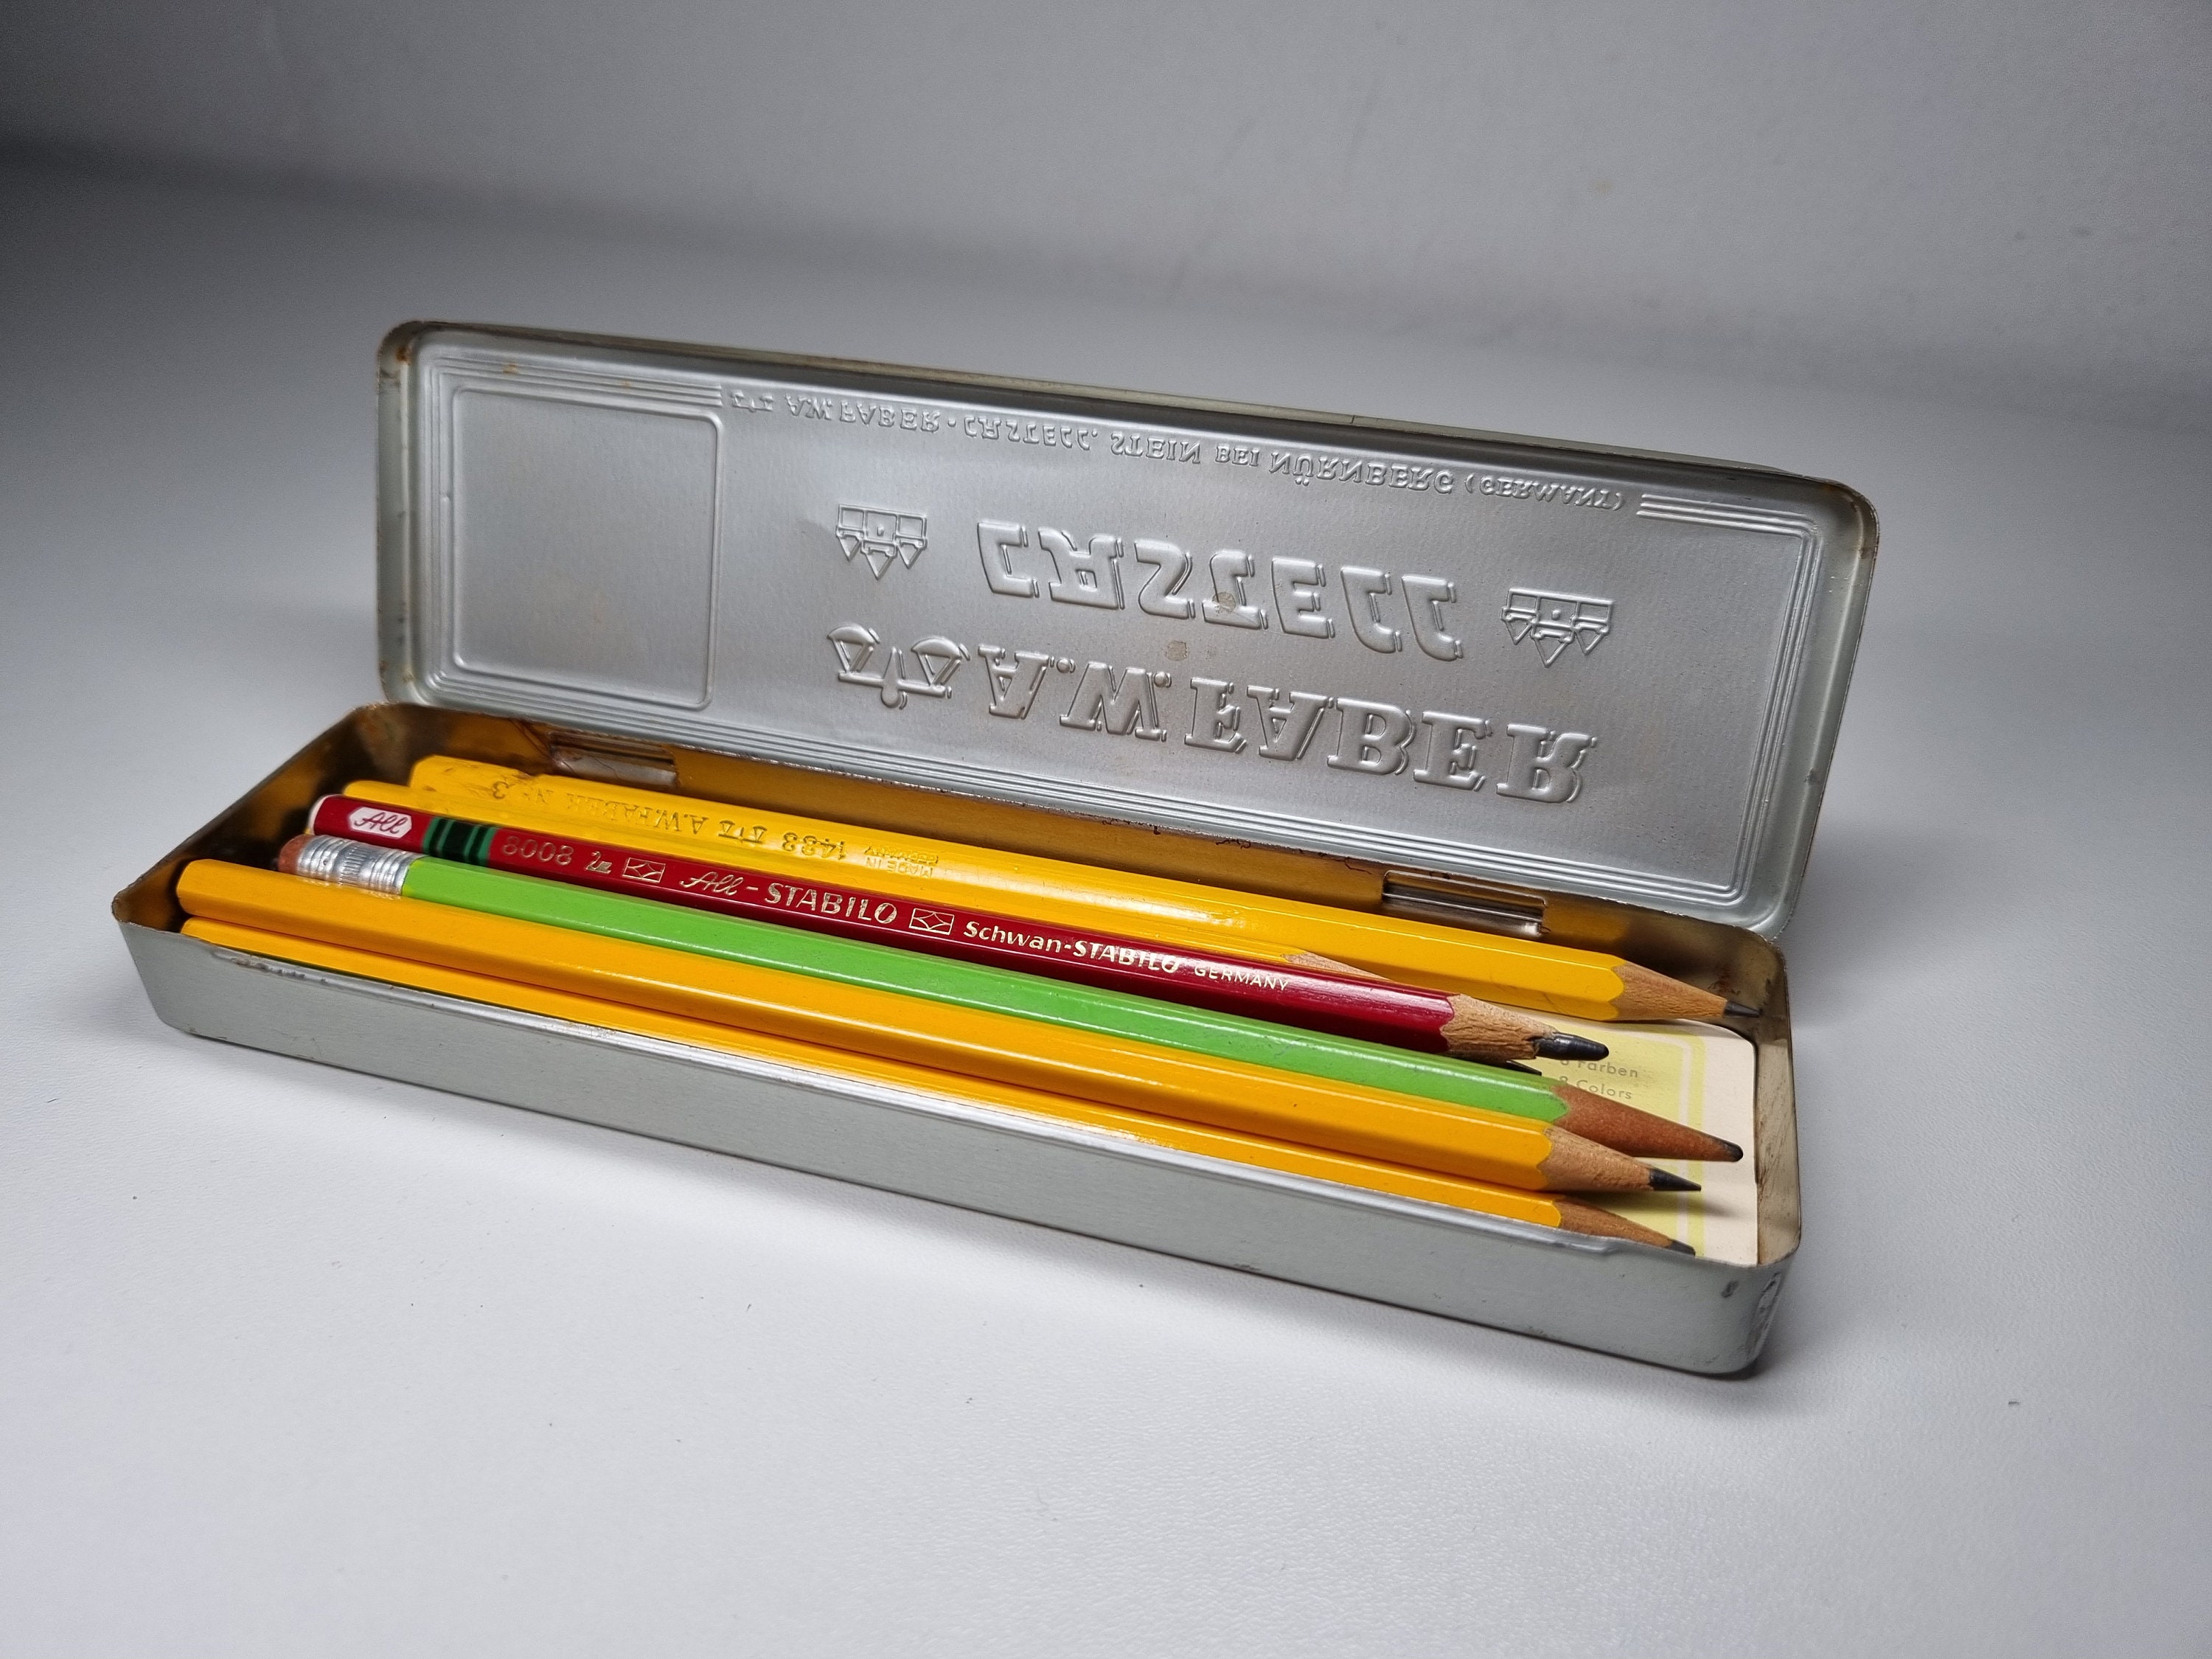 Vintage Faber-Castell Lettering Set, Made in Japan, Green Case that Snaps,  Not Sure if Complete, Appears to be Unused, 1960s?